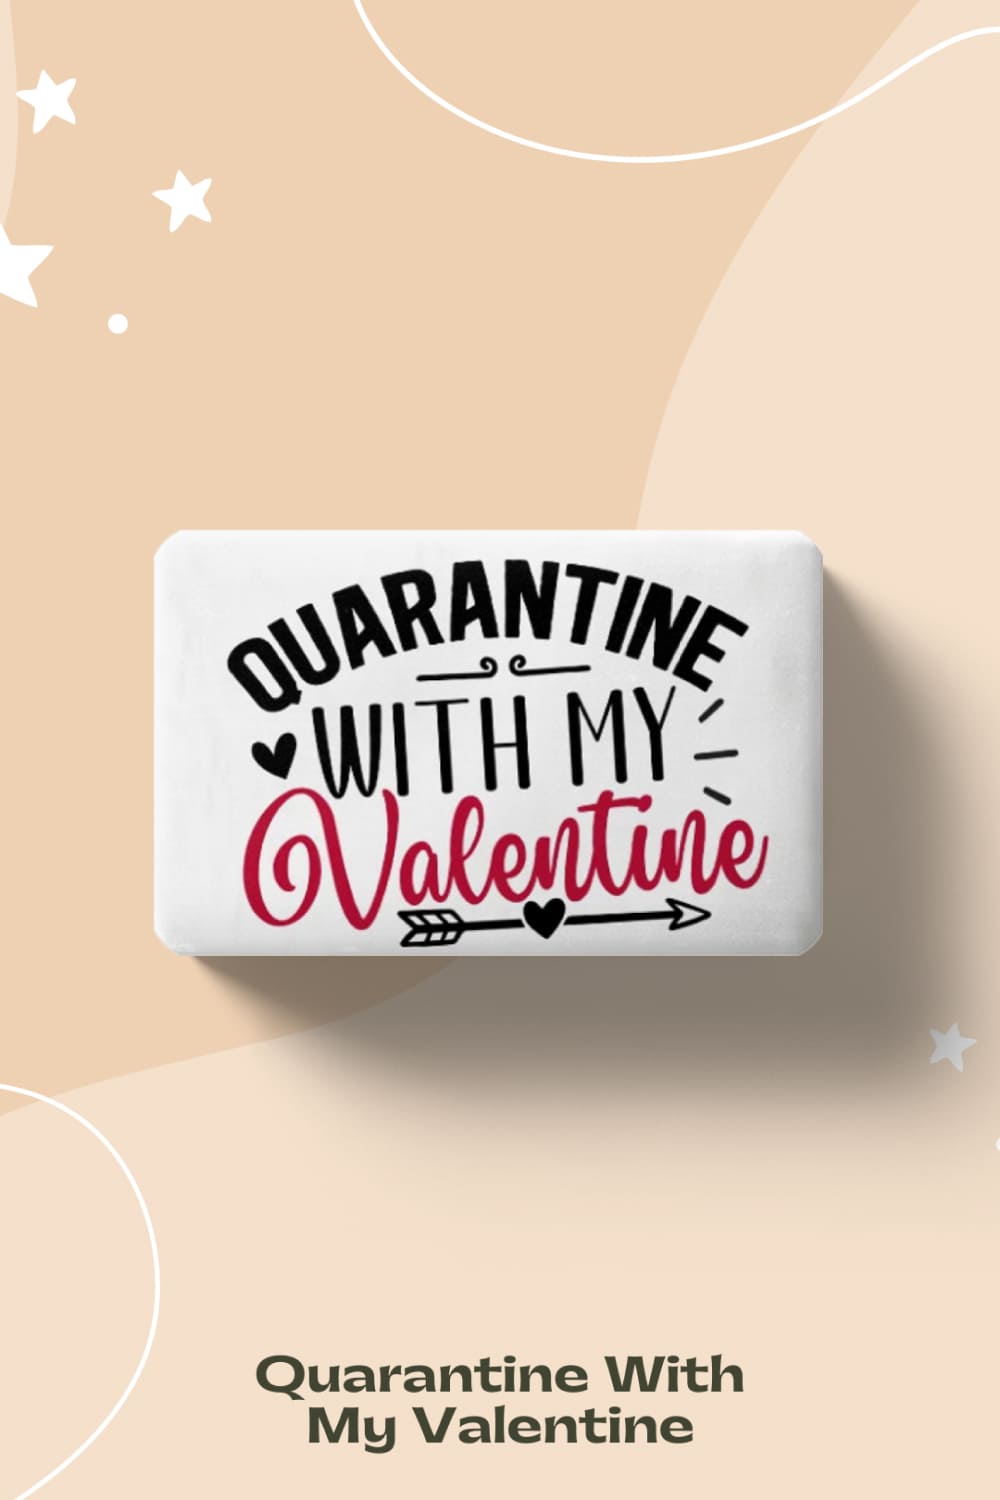 Quarantine with my valentine - pinterest image preview.